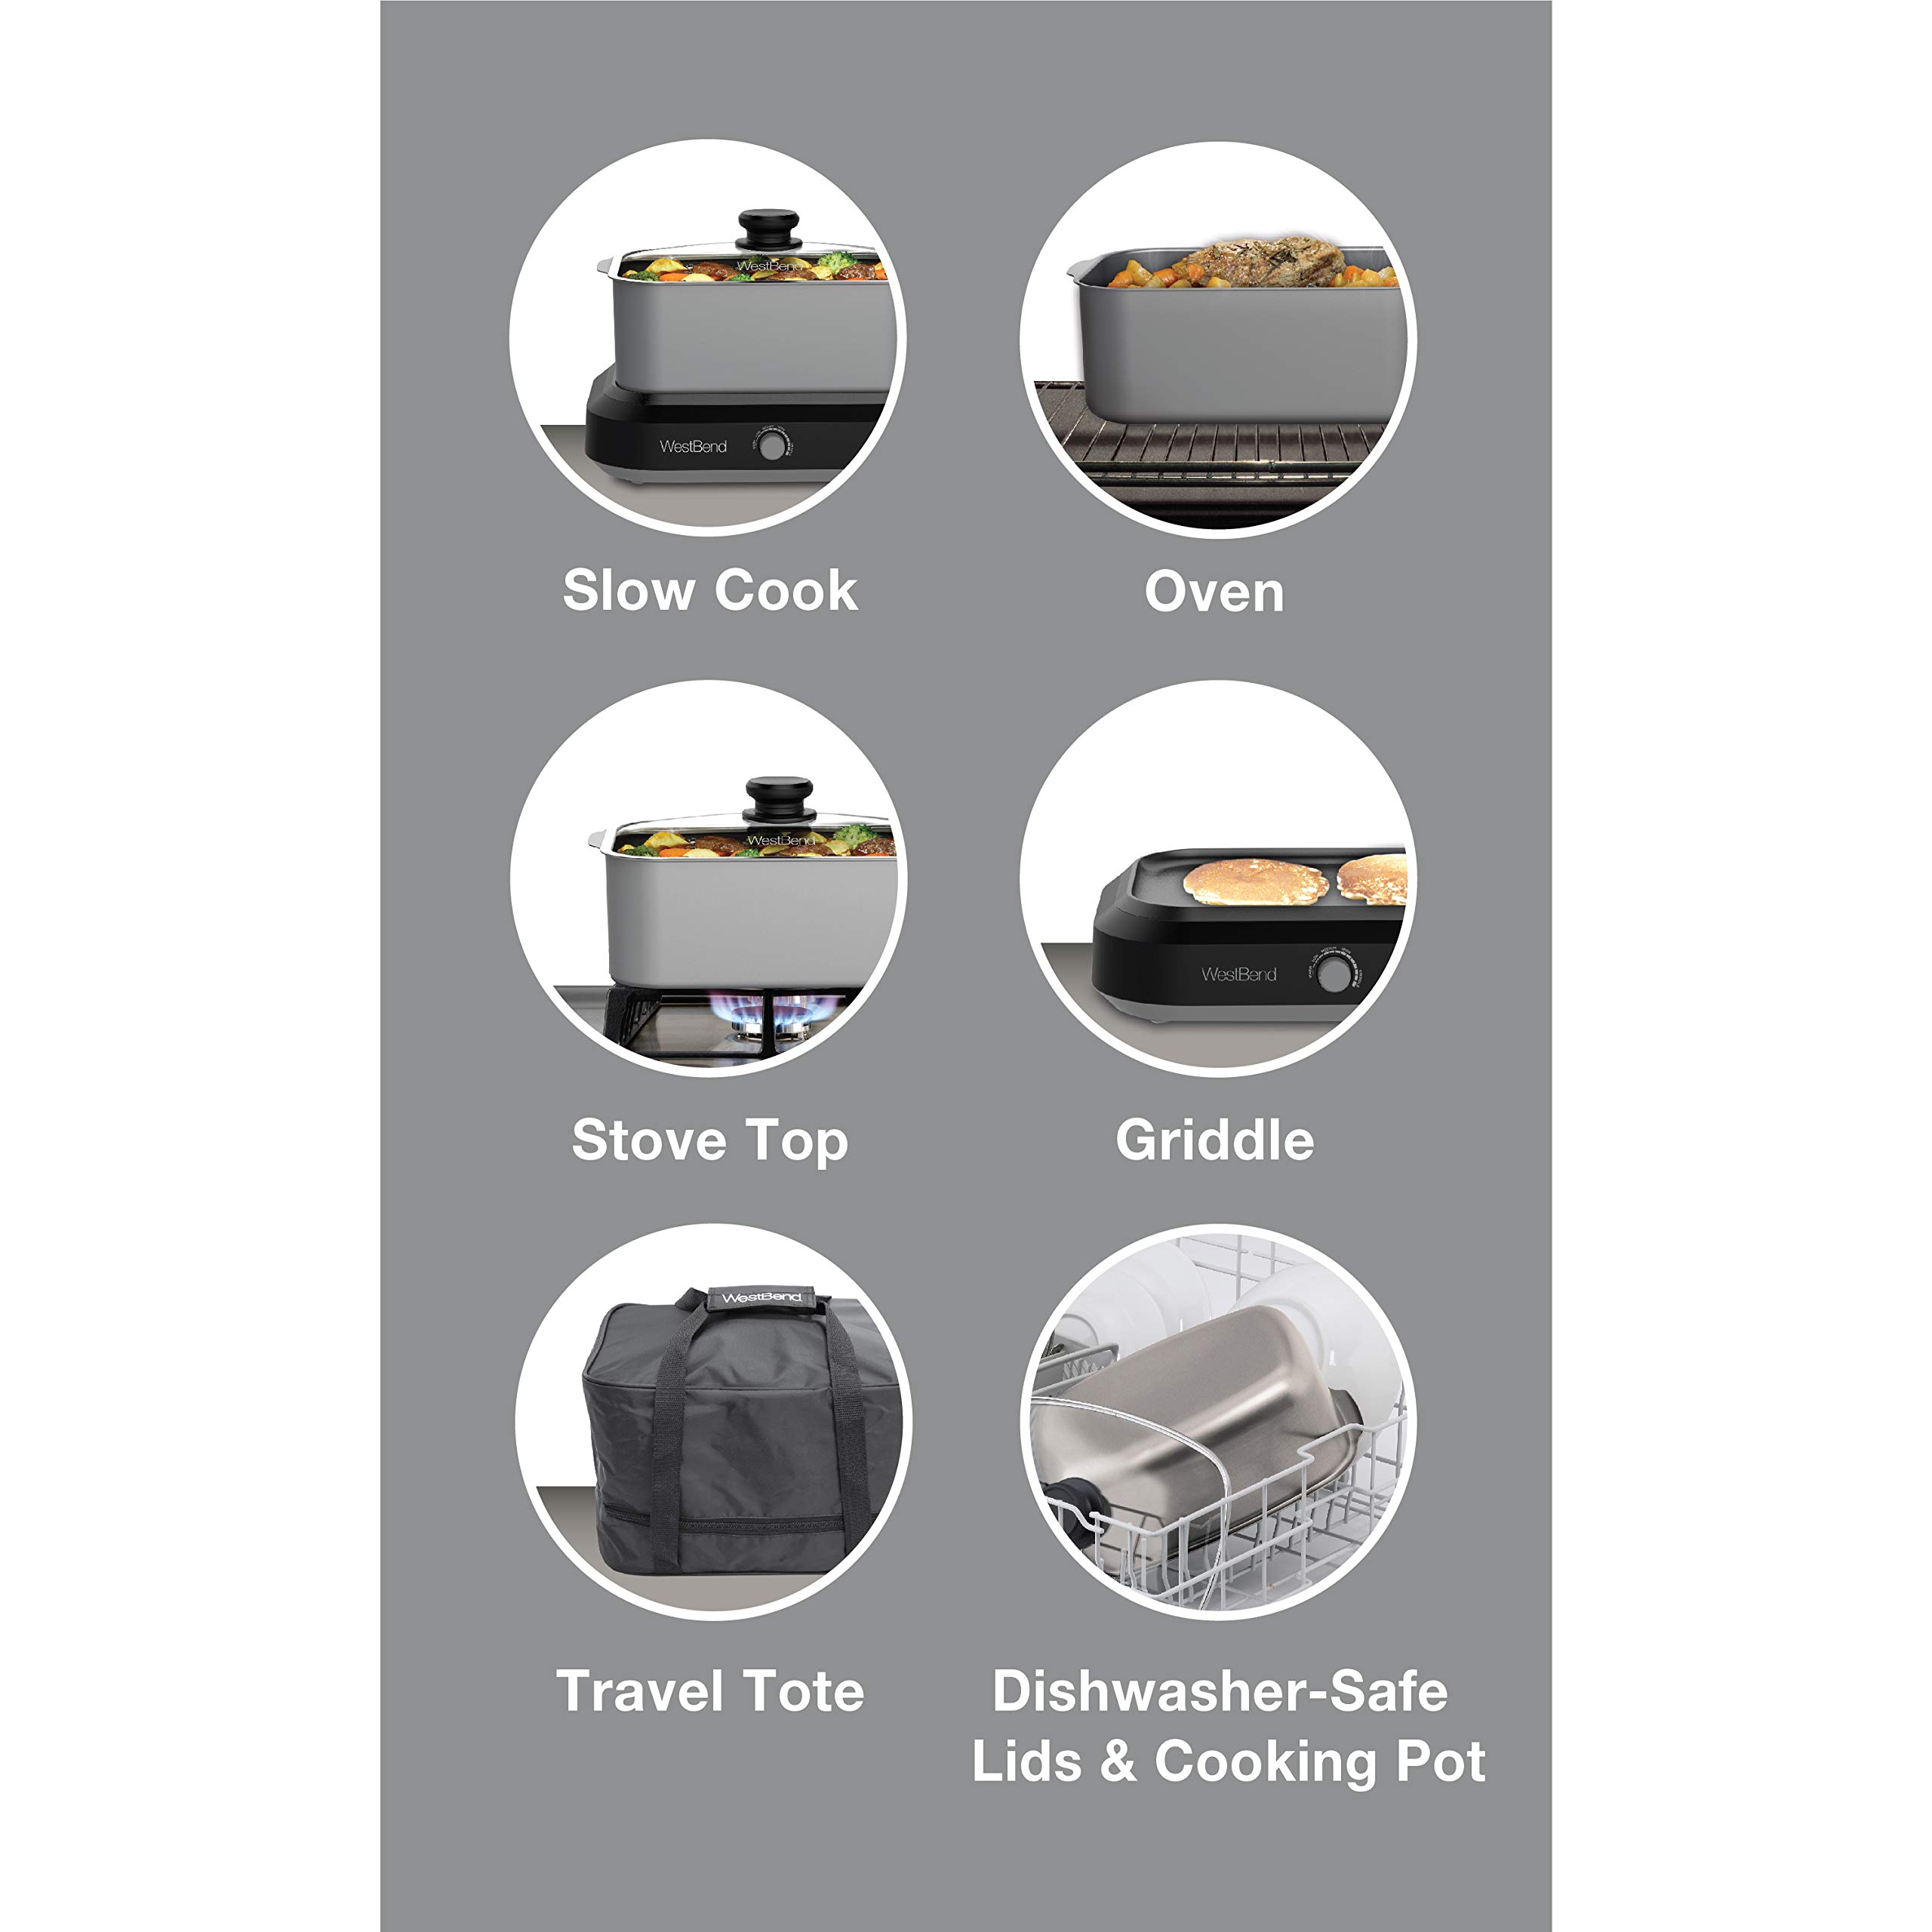 West Bend 87905 Slow Cooker Large Capacity Non-stick Variable Temperature Control Includes Travel Lid and Thermal Carrying Case, 5-Quart, Silver